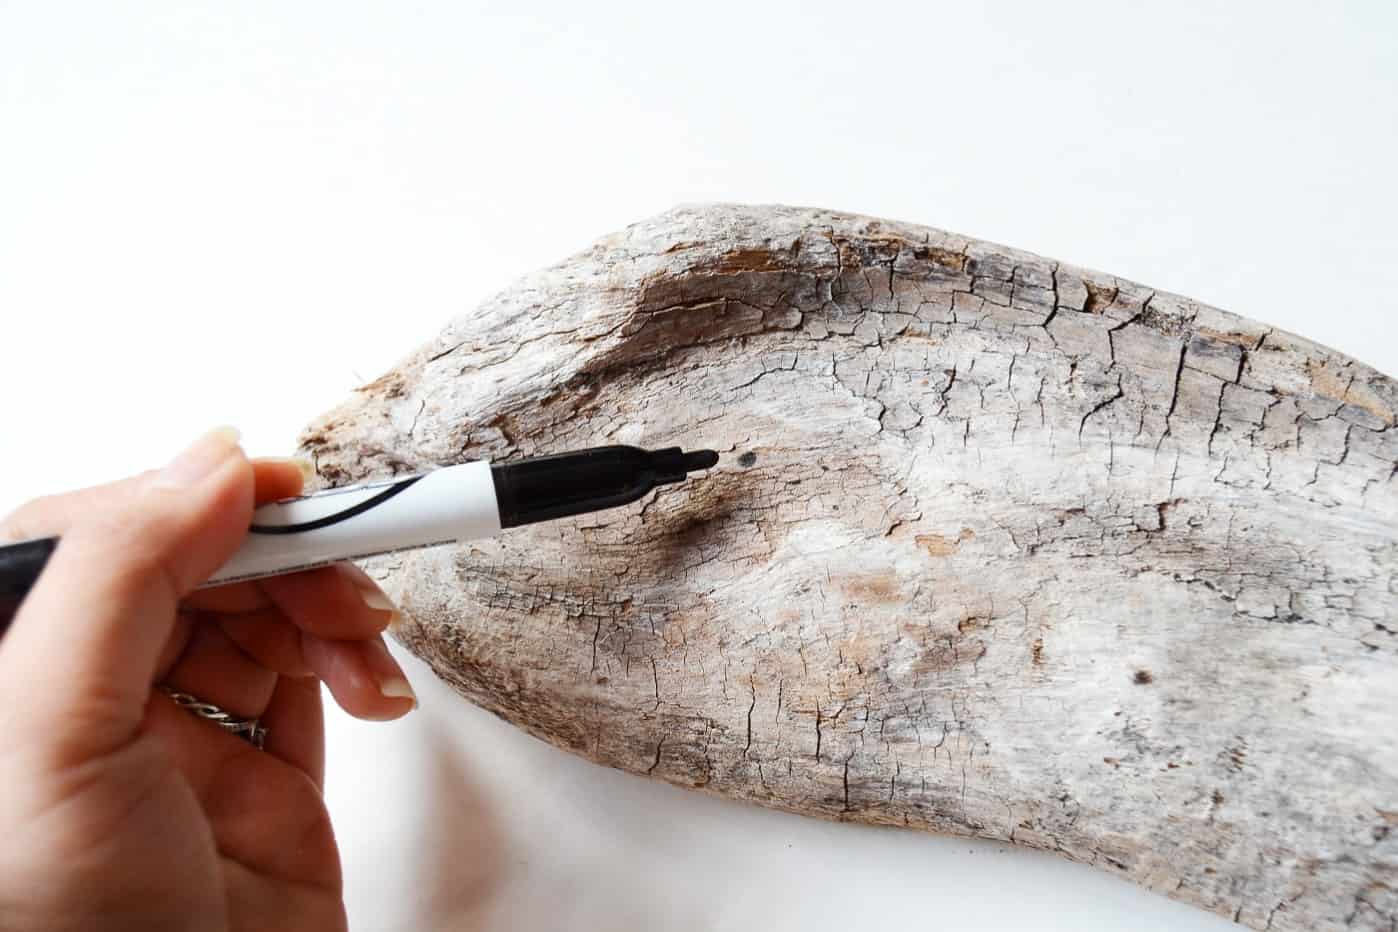 Marking holes on driftwood with a Sharpie